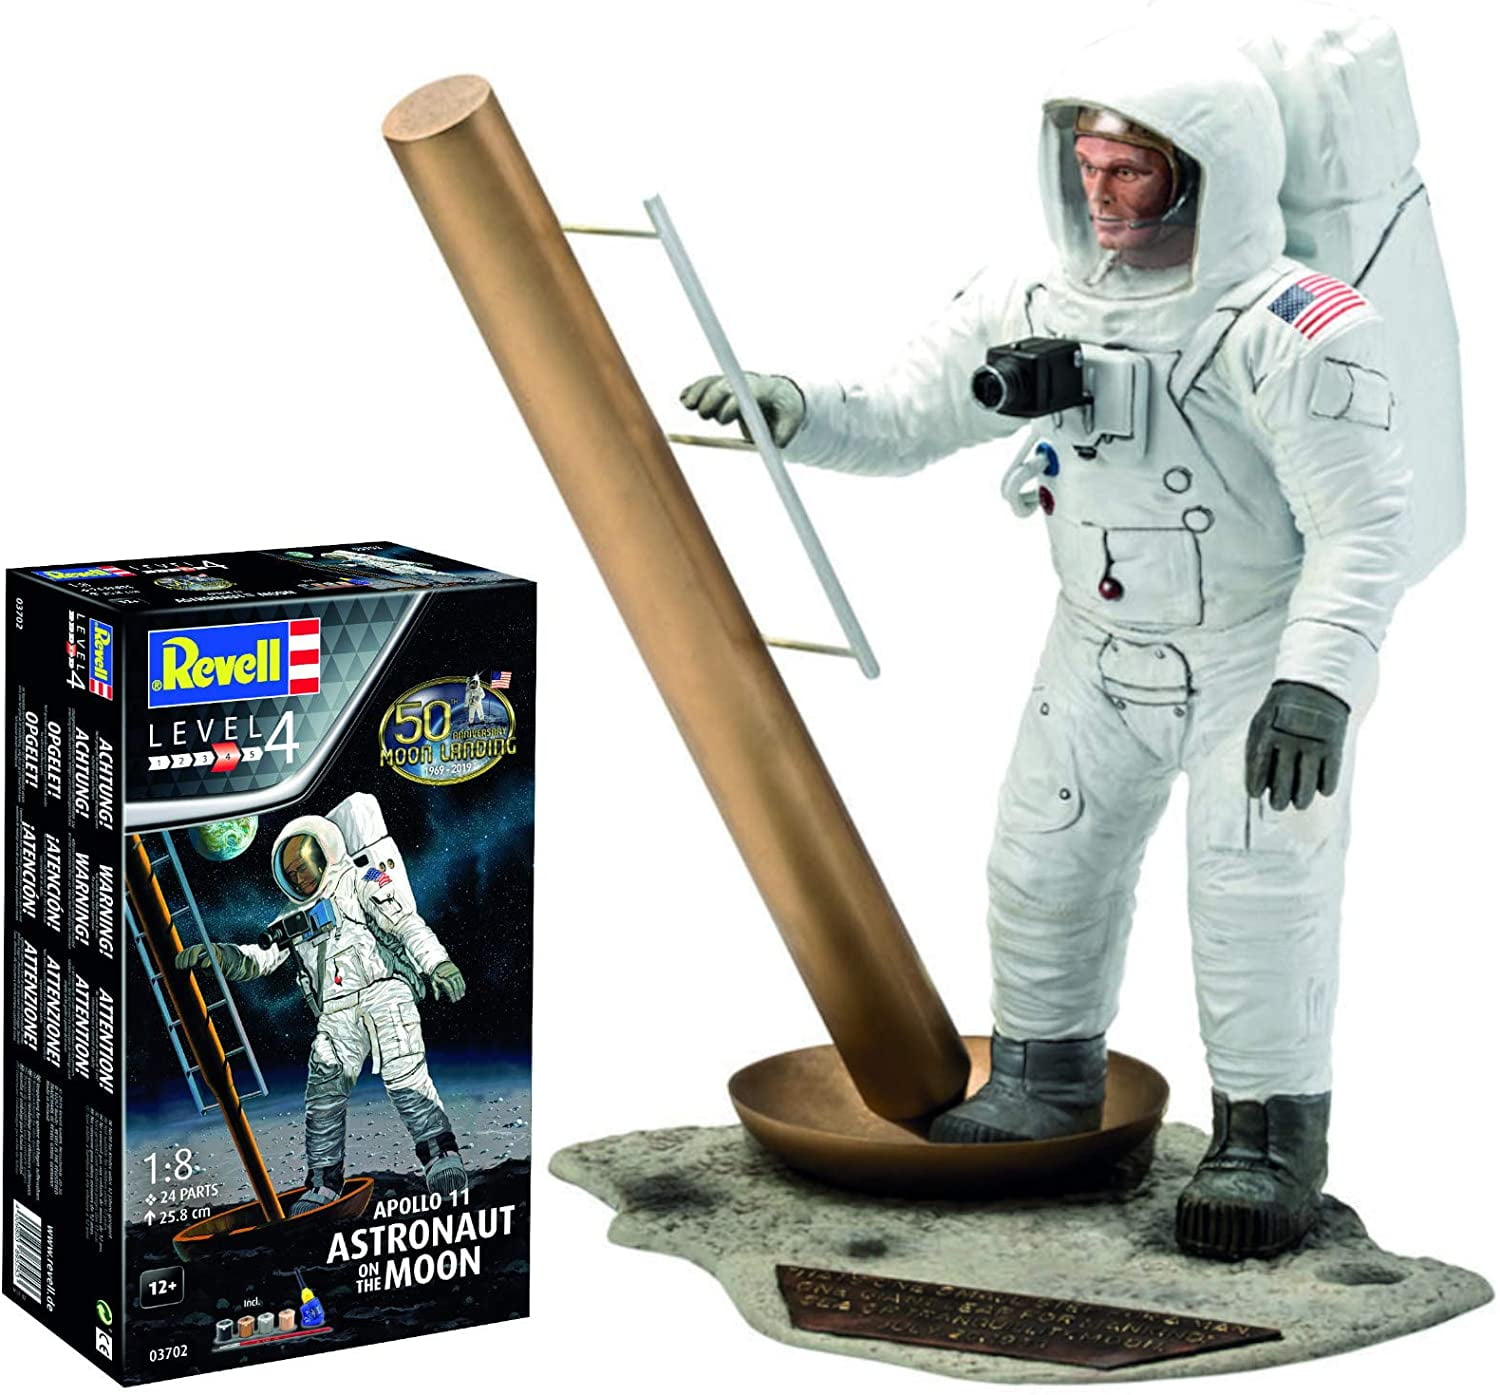 Tote Bag White Monarch Models Moon Suit Box Art not the art for upcoming release of model kit